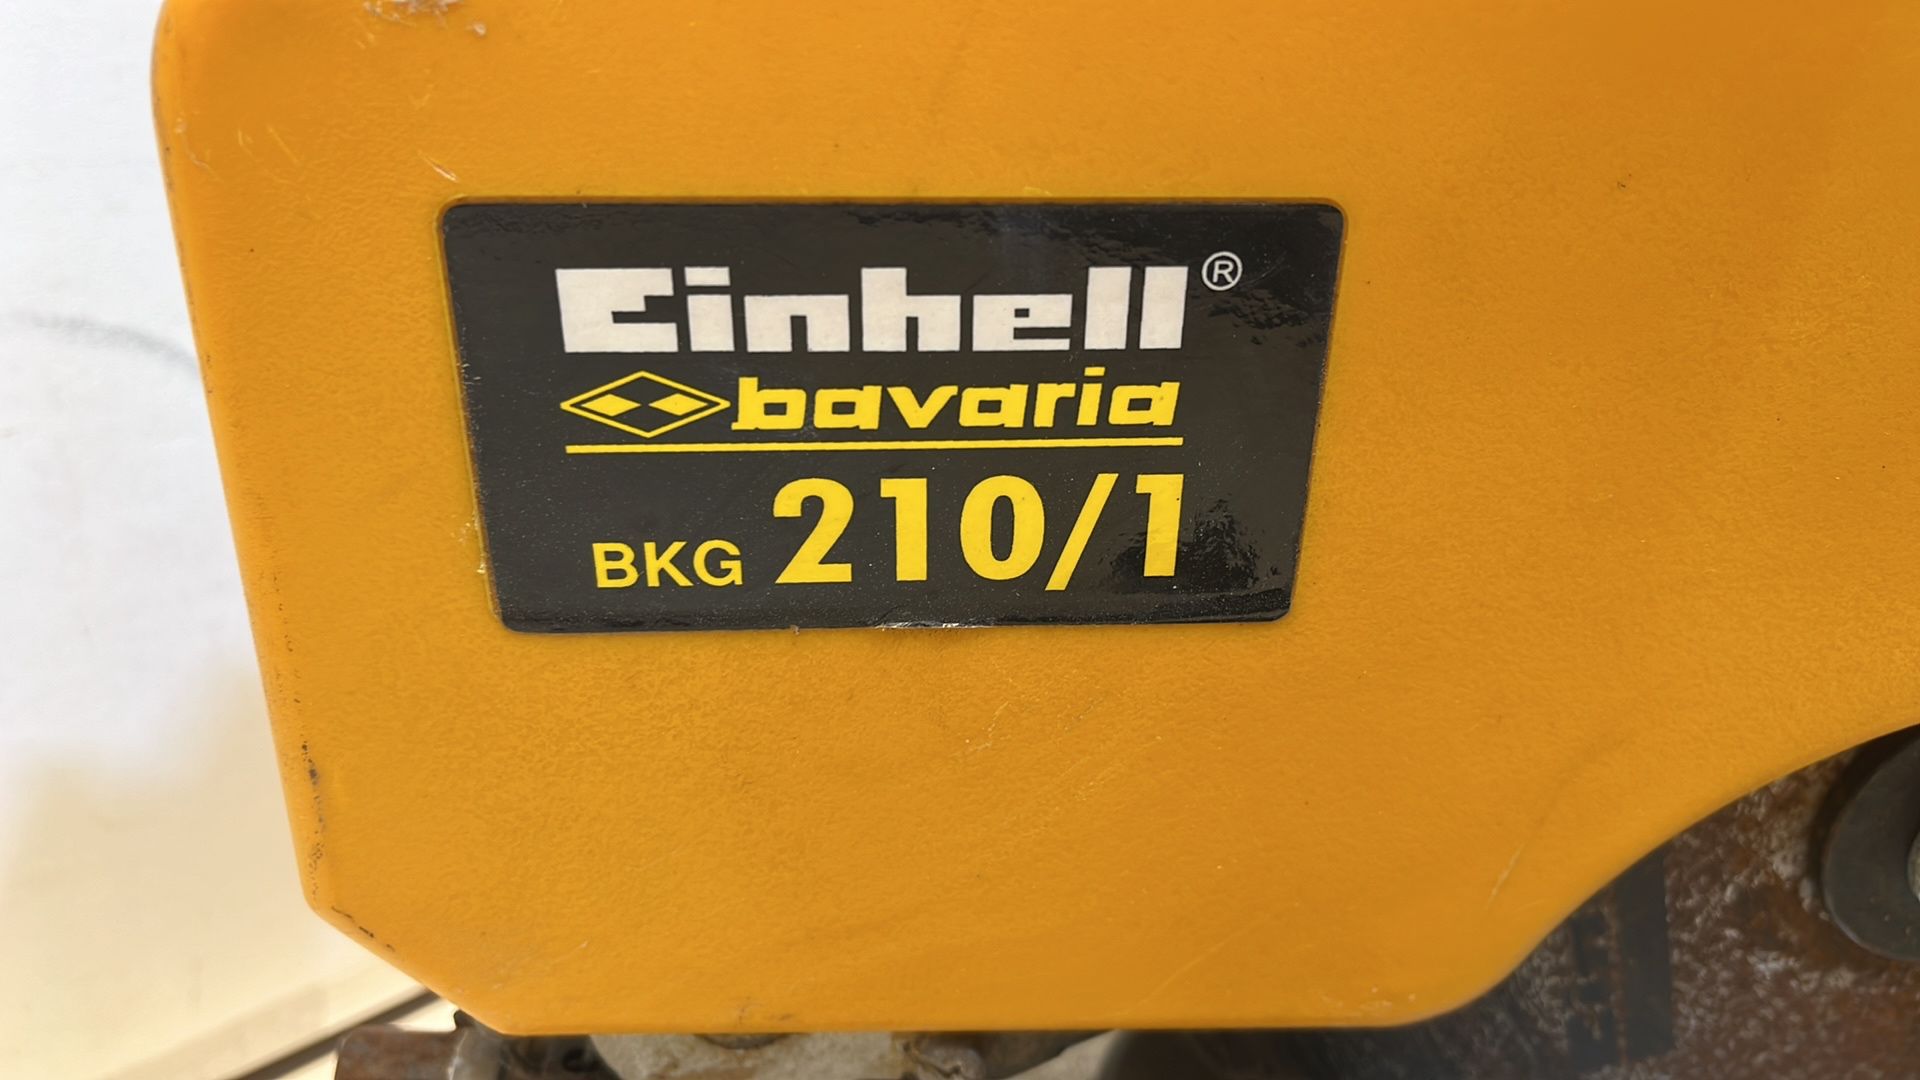 Einhell BKG210/1 Mire Saw - Image 2 of 3